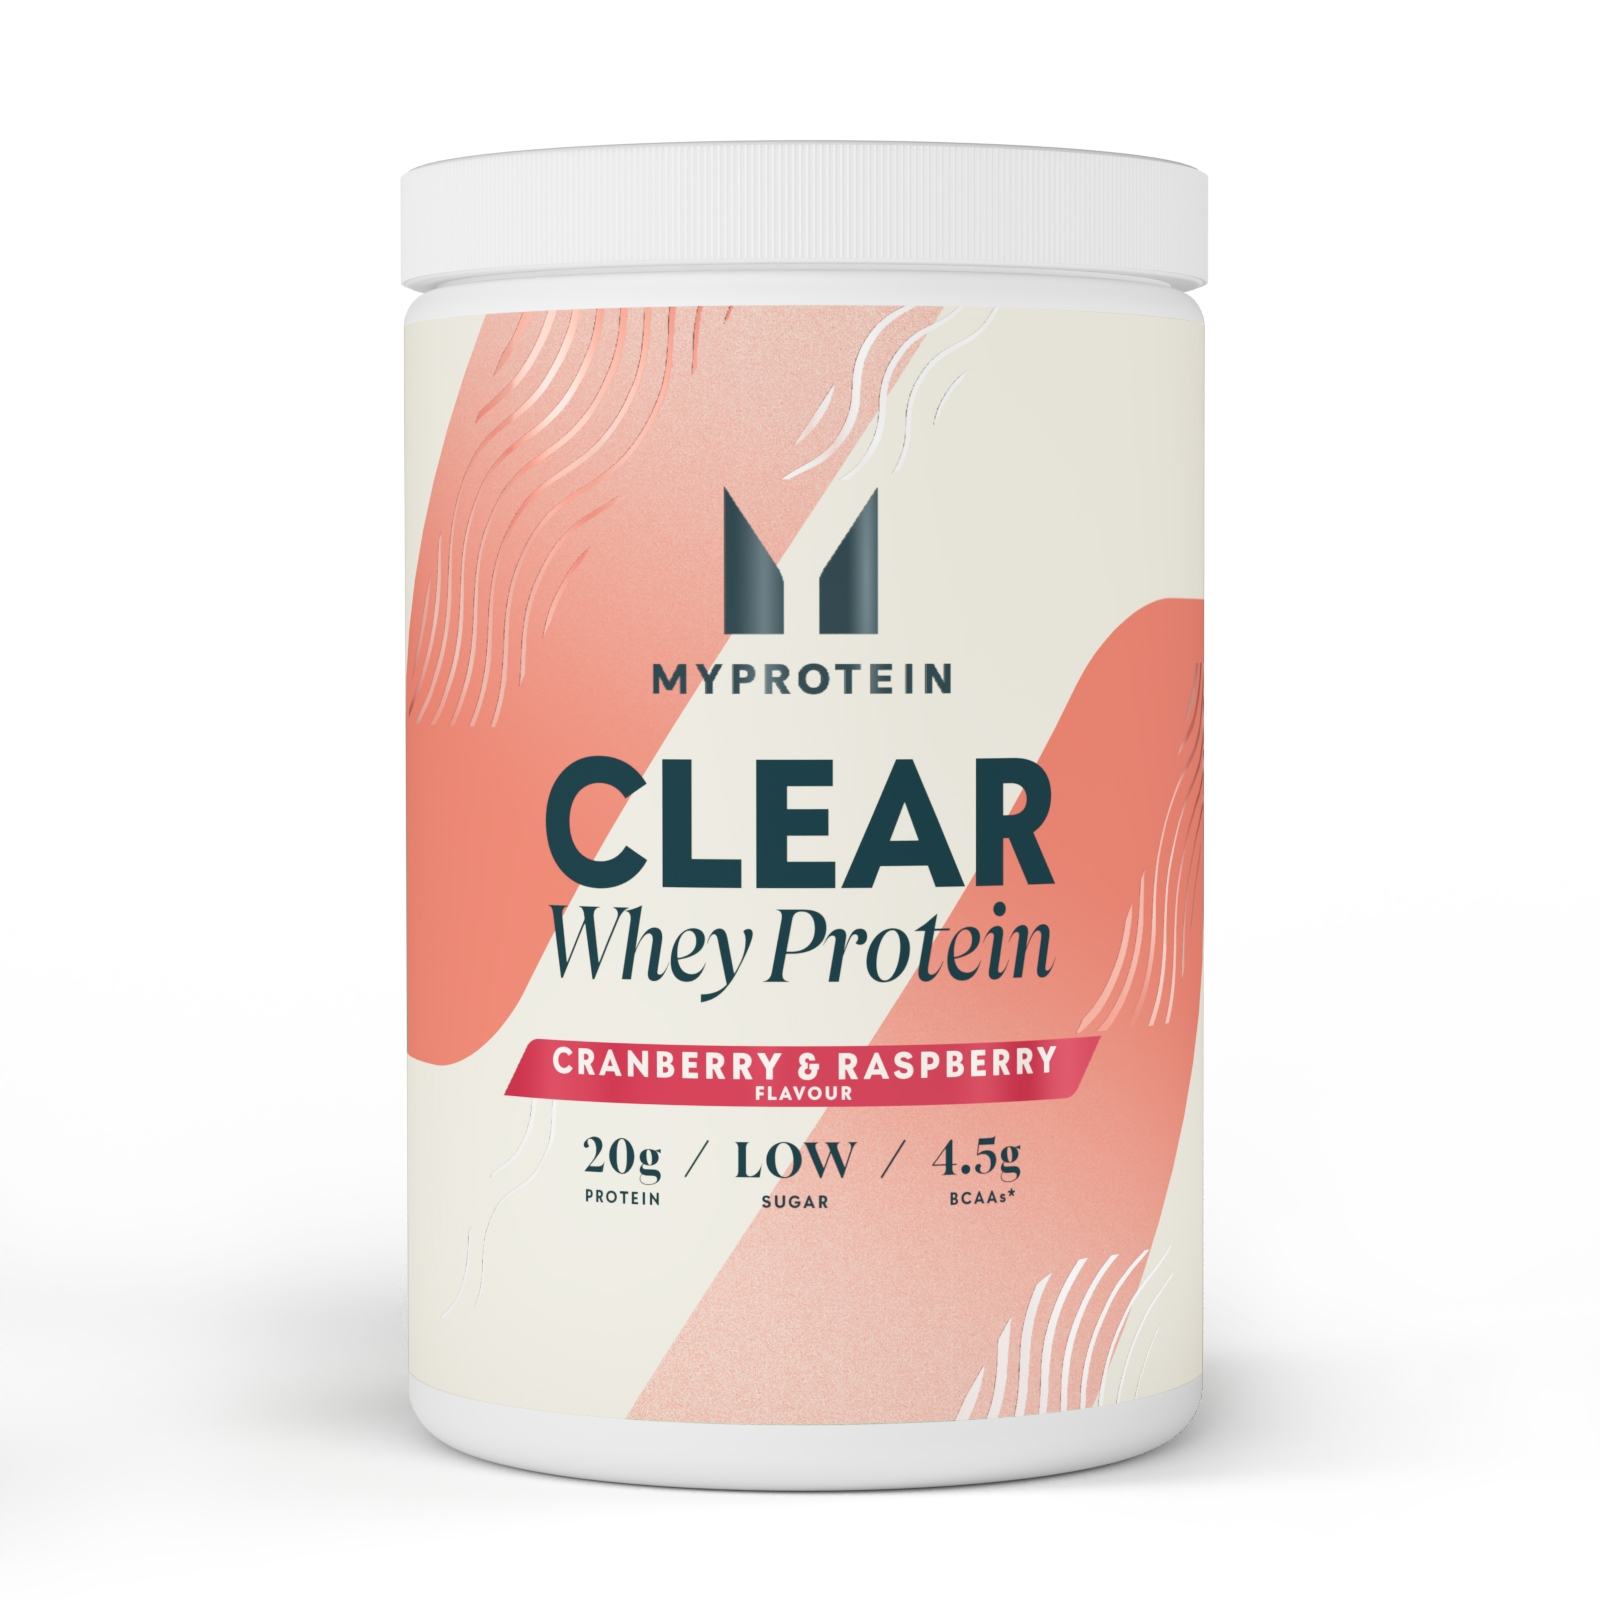 E-shop Clear Whey Proteín - 20servings - Cranberry & Raspberry